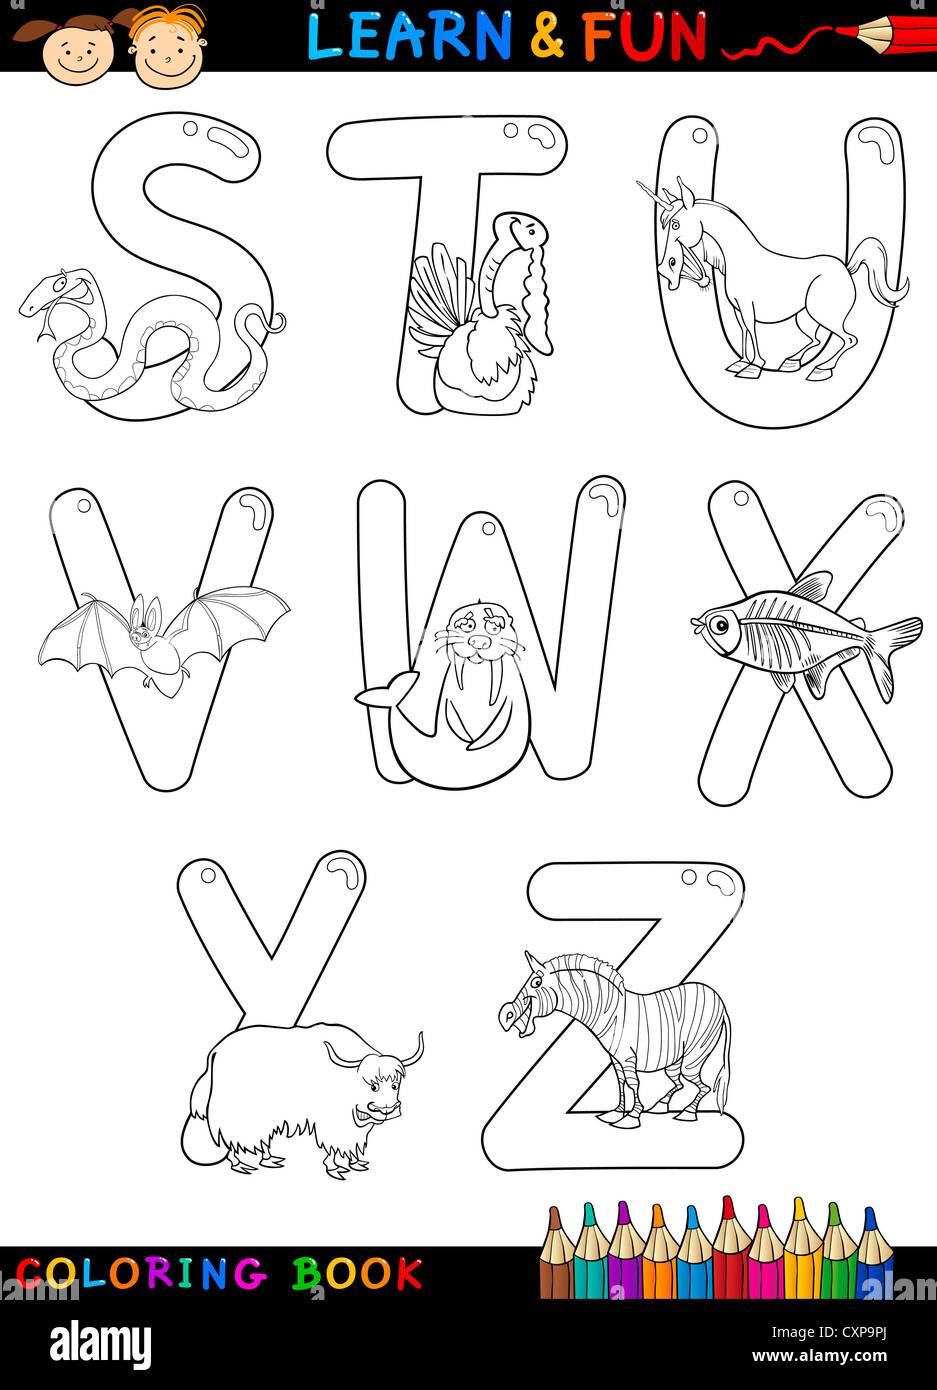 Cartoon Alphabet Coloring Book or Page Set with Funny Animals for Children  Education and Fun Stock Photo - Alamy